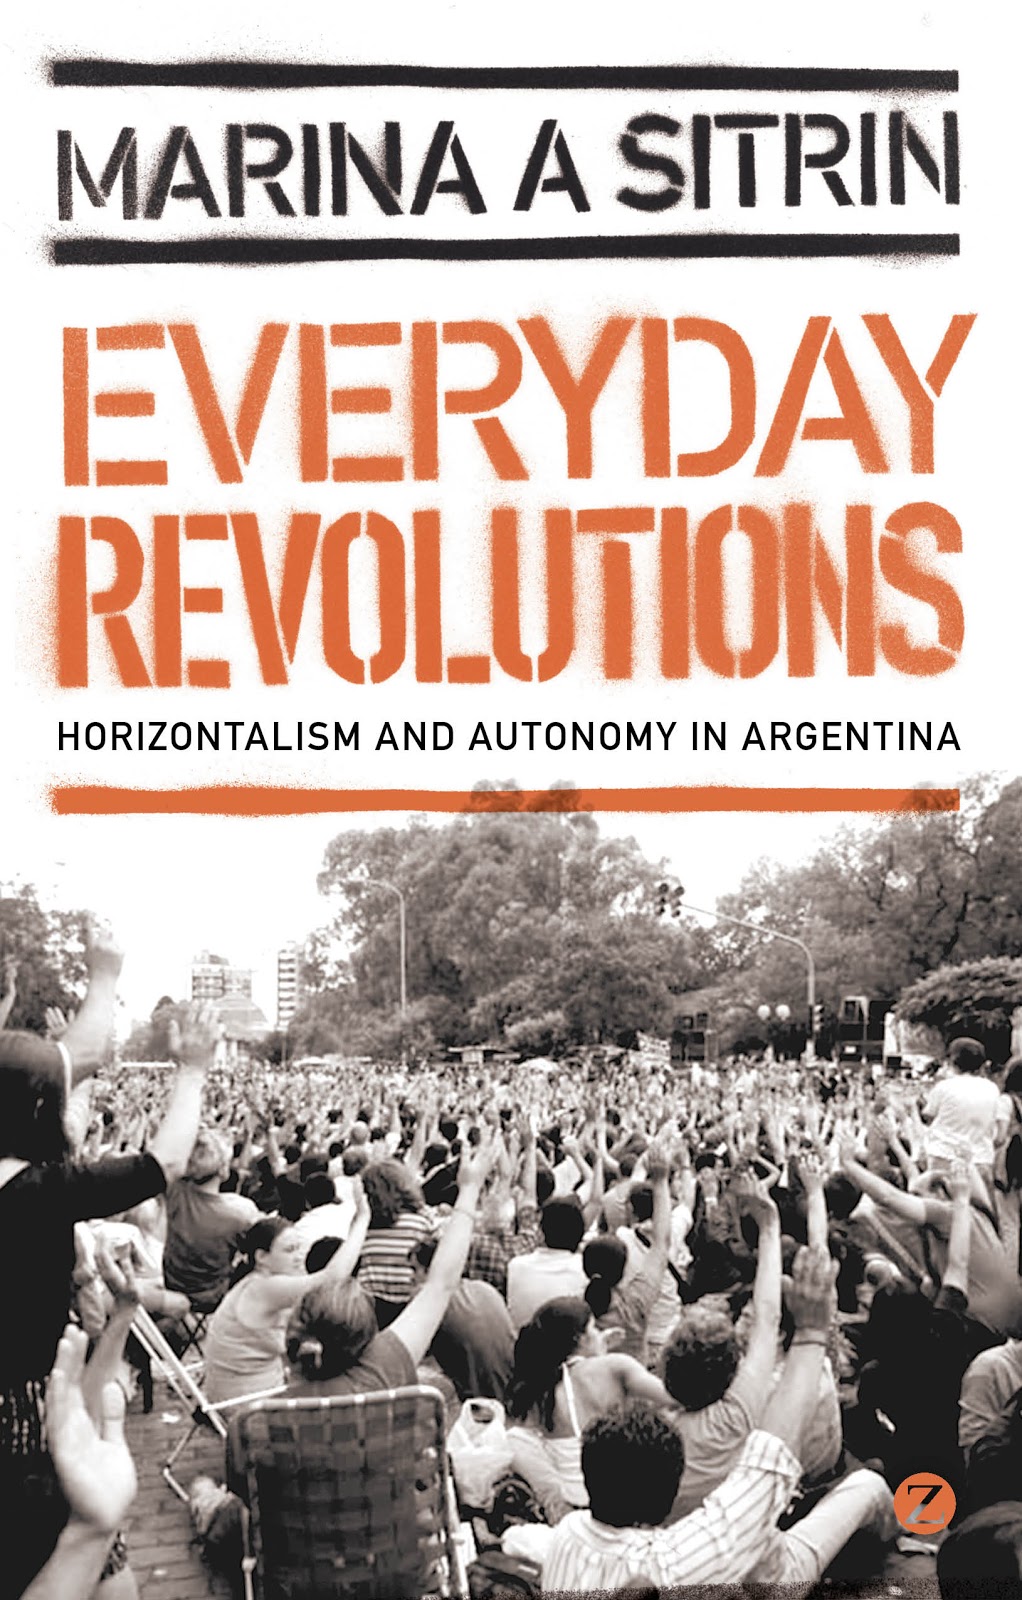 Book Launch with Marina Sitrin—Everyday Revolutions: Horizontalism and Autonomy in Argentina  